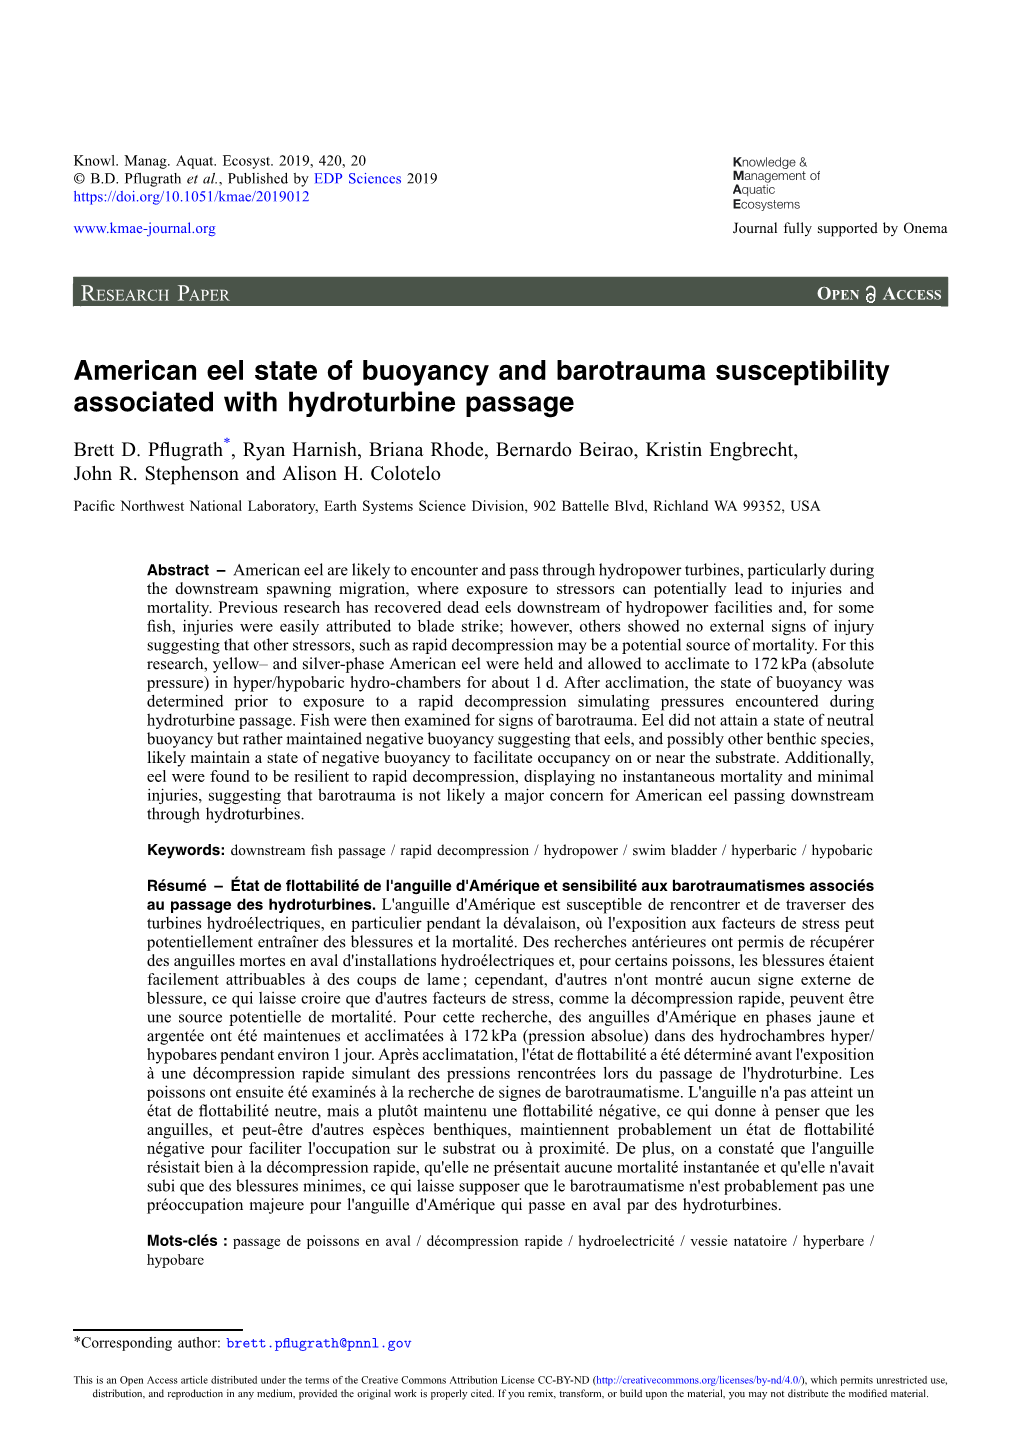 American Eel State of Buoyancy and Barotrauma Susceptibility Associated with Hydroturbine Passage